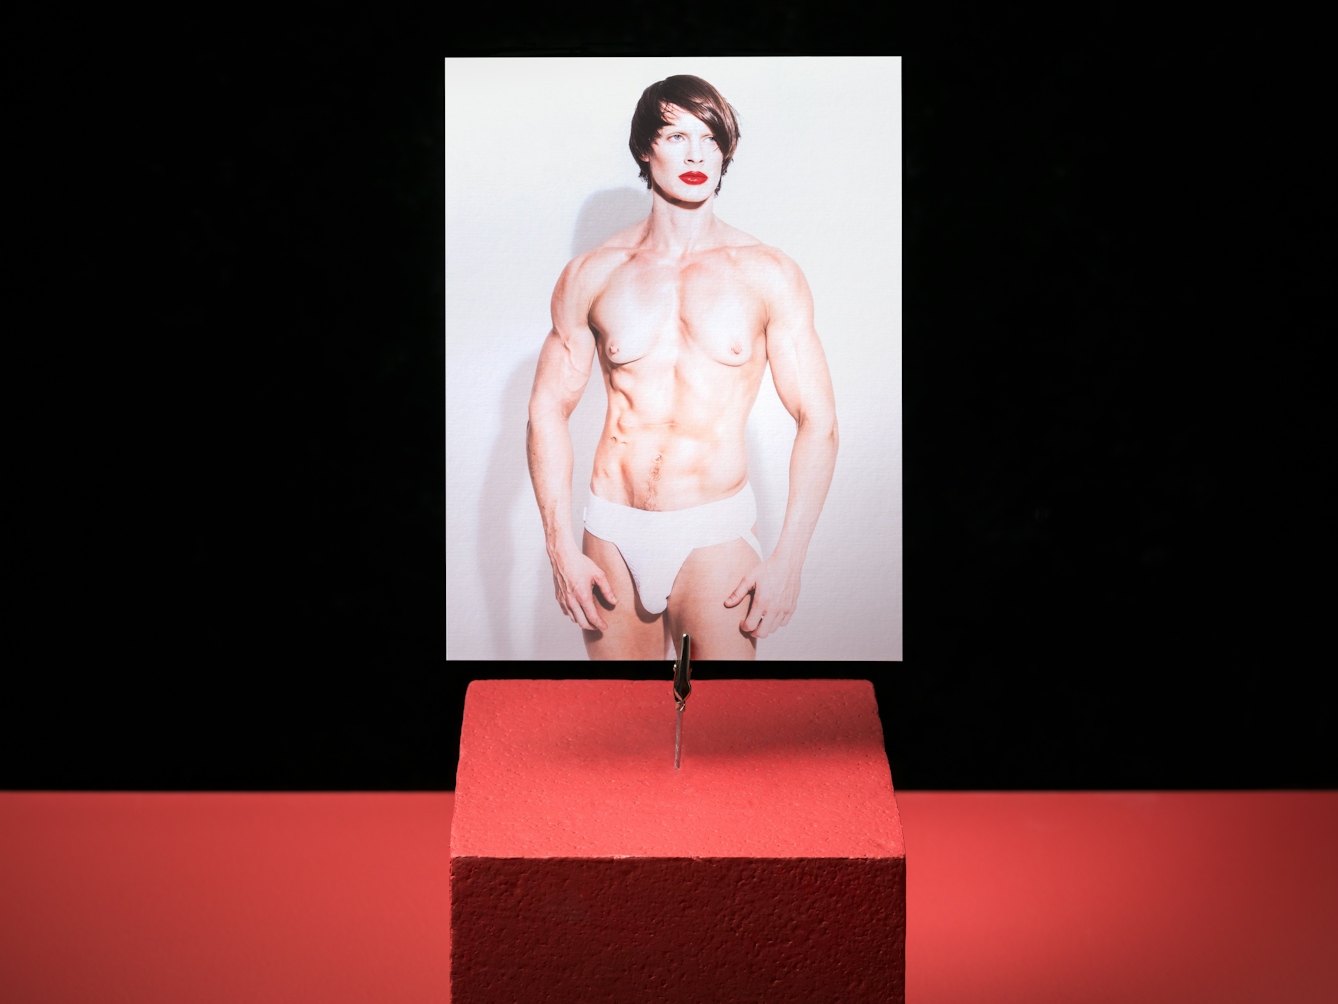 Photograph of a red cube on a red and black background. A crocodile clip is holding a portrait image of a largely naked person with red lipstick and white thong, on a white background.